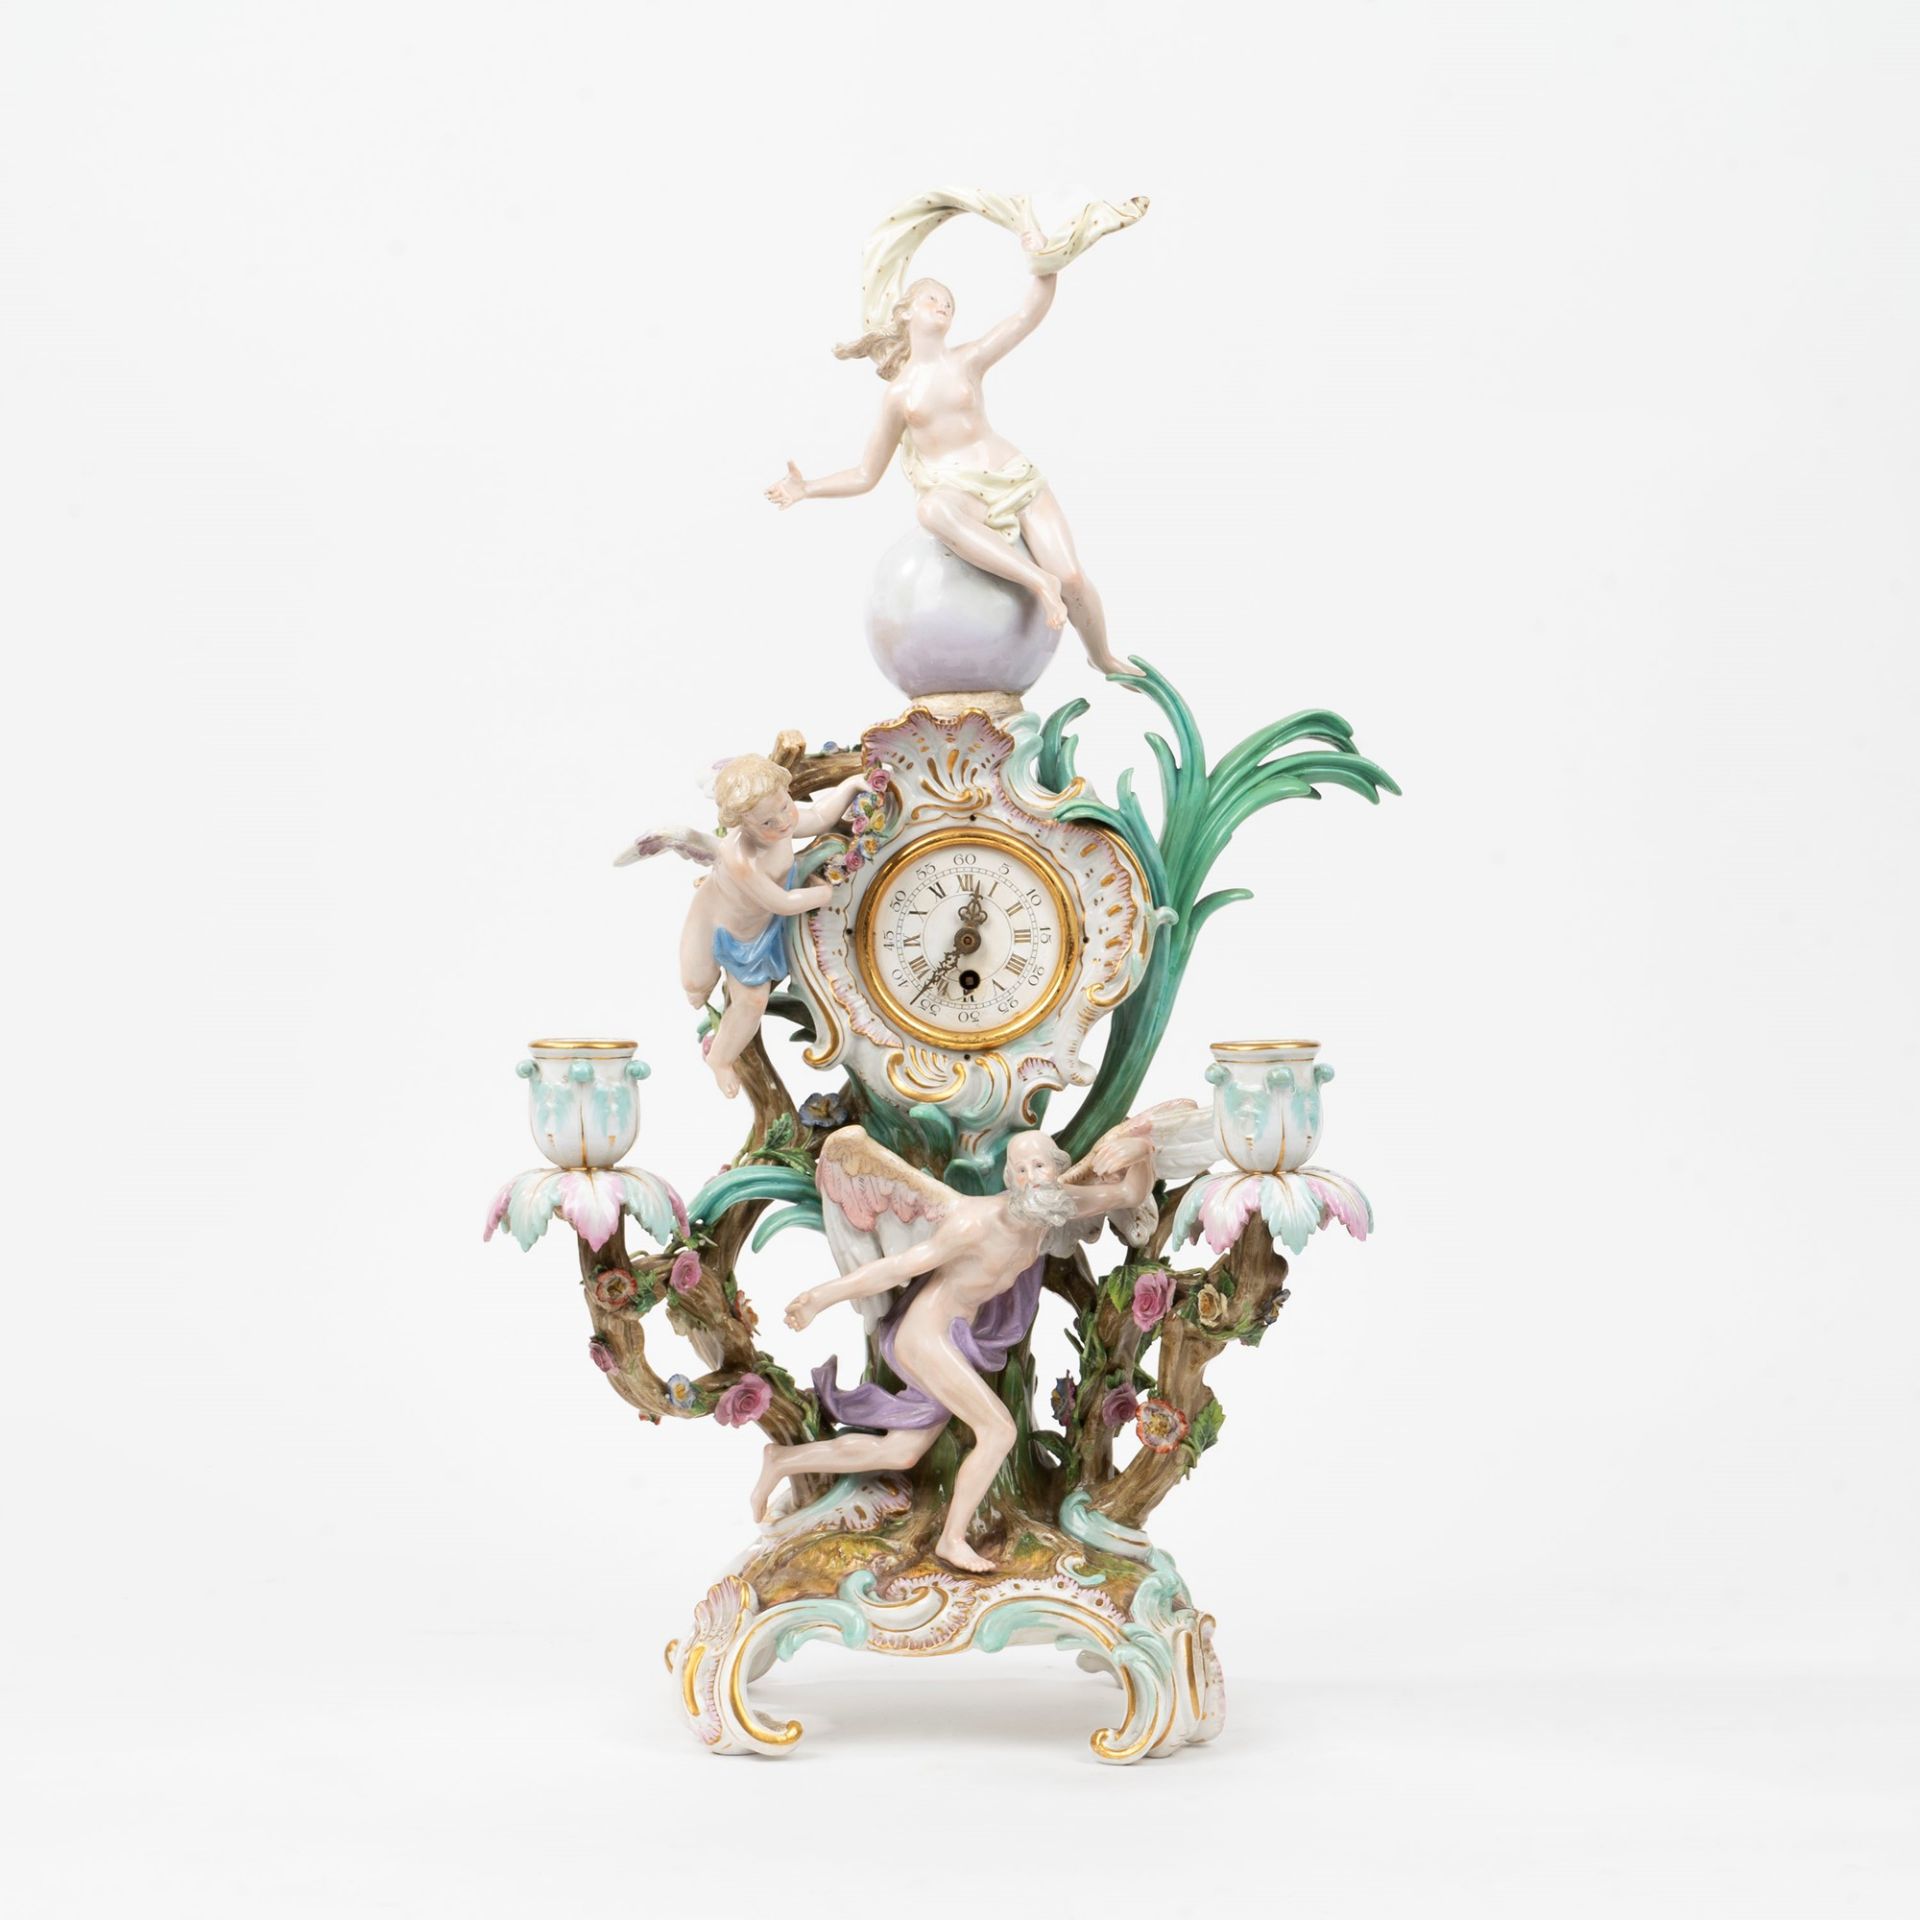 Polychrome porcelain table clock depicting the Truth revealed by Time, Meissen manufacture, 19th cen